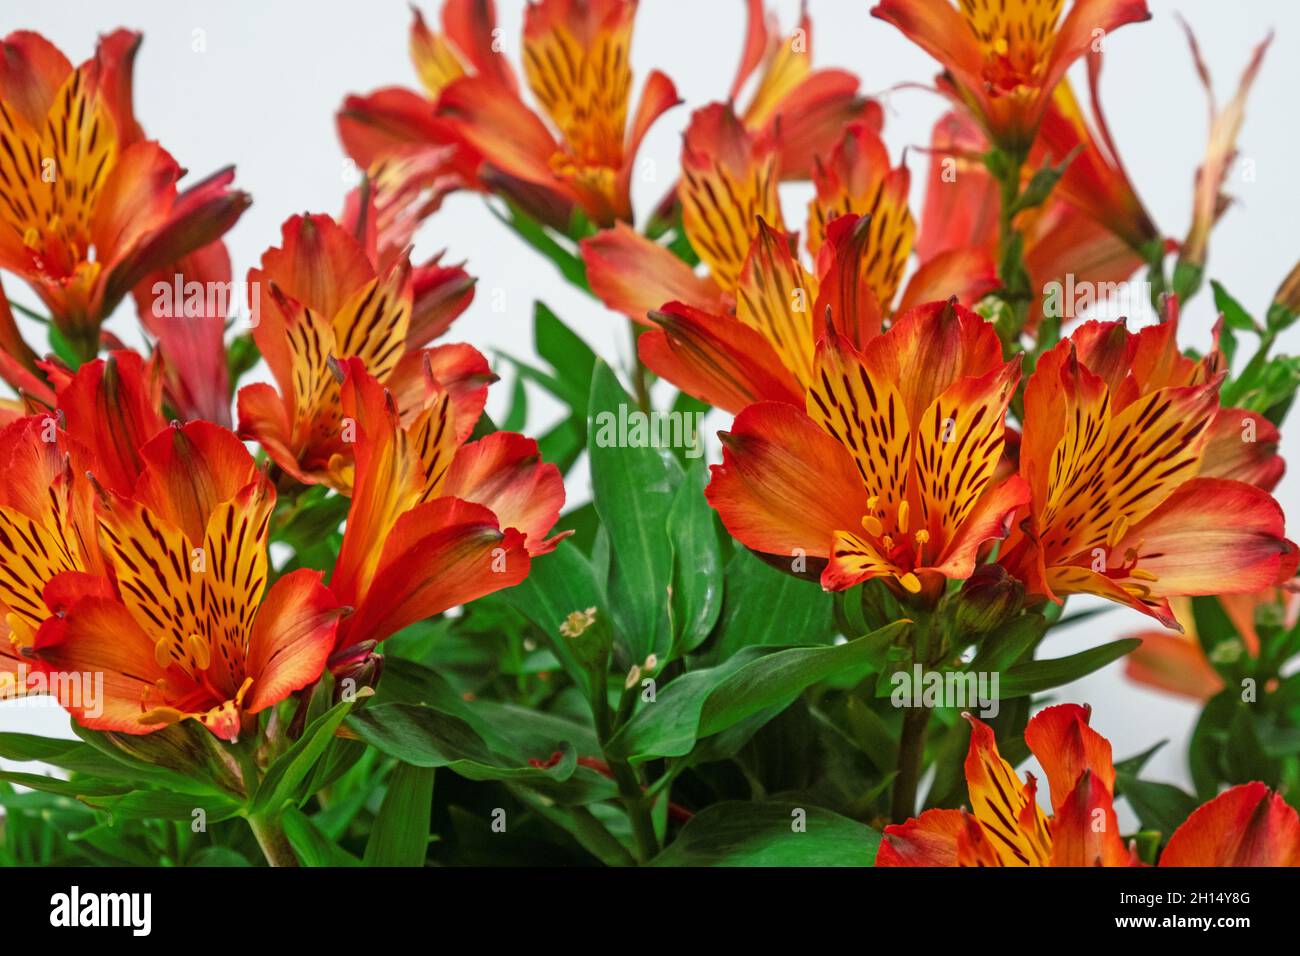 Colourful display of Alstroemeria Aurea flowers ( also known as the Peruvian Lily ) native to the Americas Stock Photo